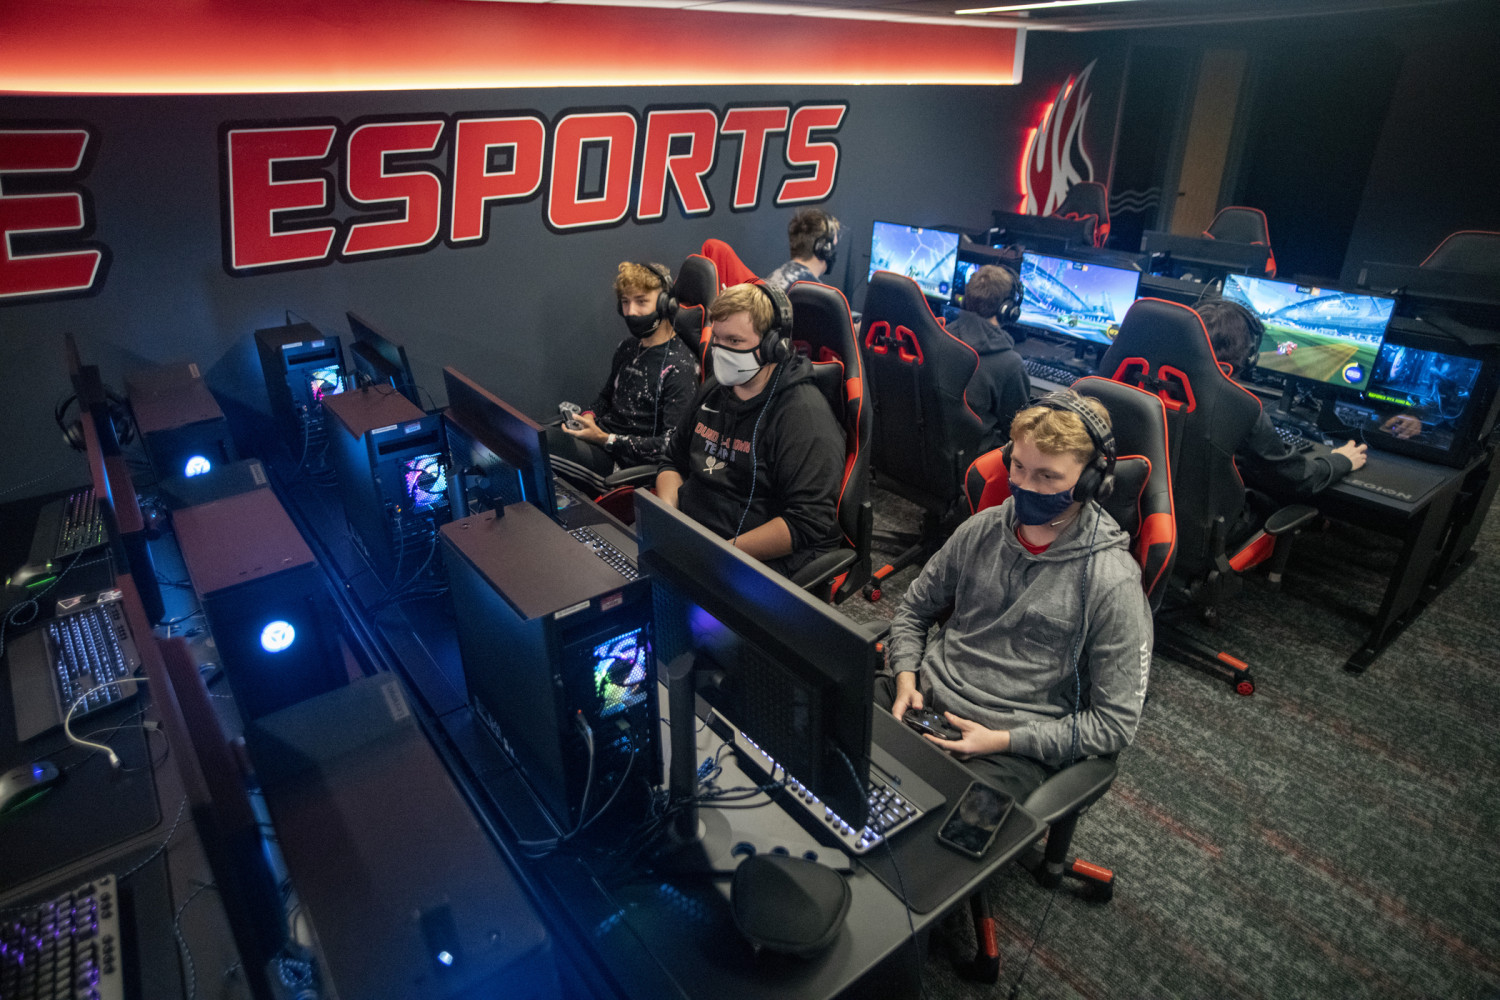 Carthage recently launched a new coed esports team with a brand new arena!